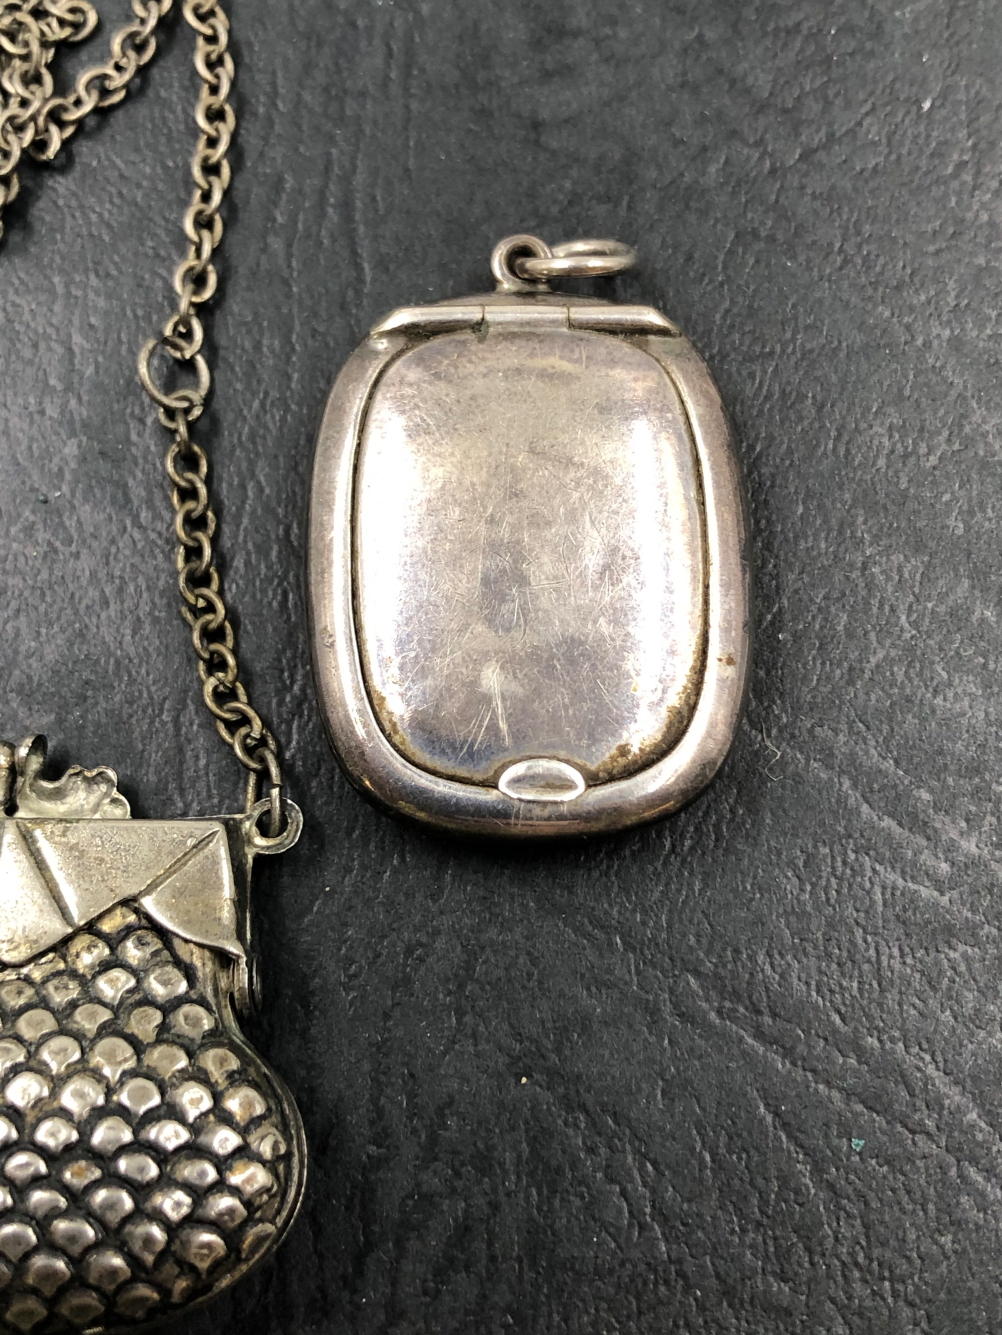 A HALLMARKED SILVER SNUFF BOX WITH SUSPENSION RING, A NICKEL PURSE WITH CHAIN, AND A NICKEL MONOGRAM - Image 4 of 4